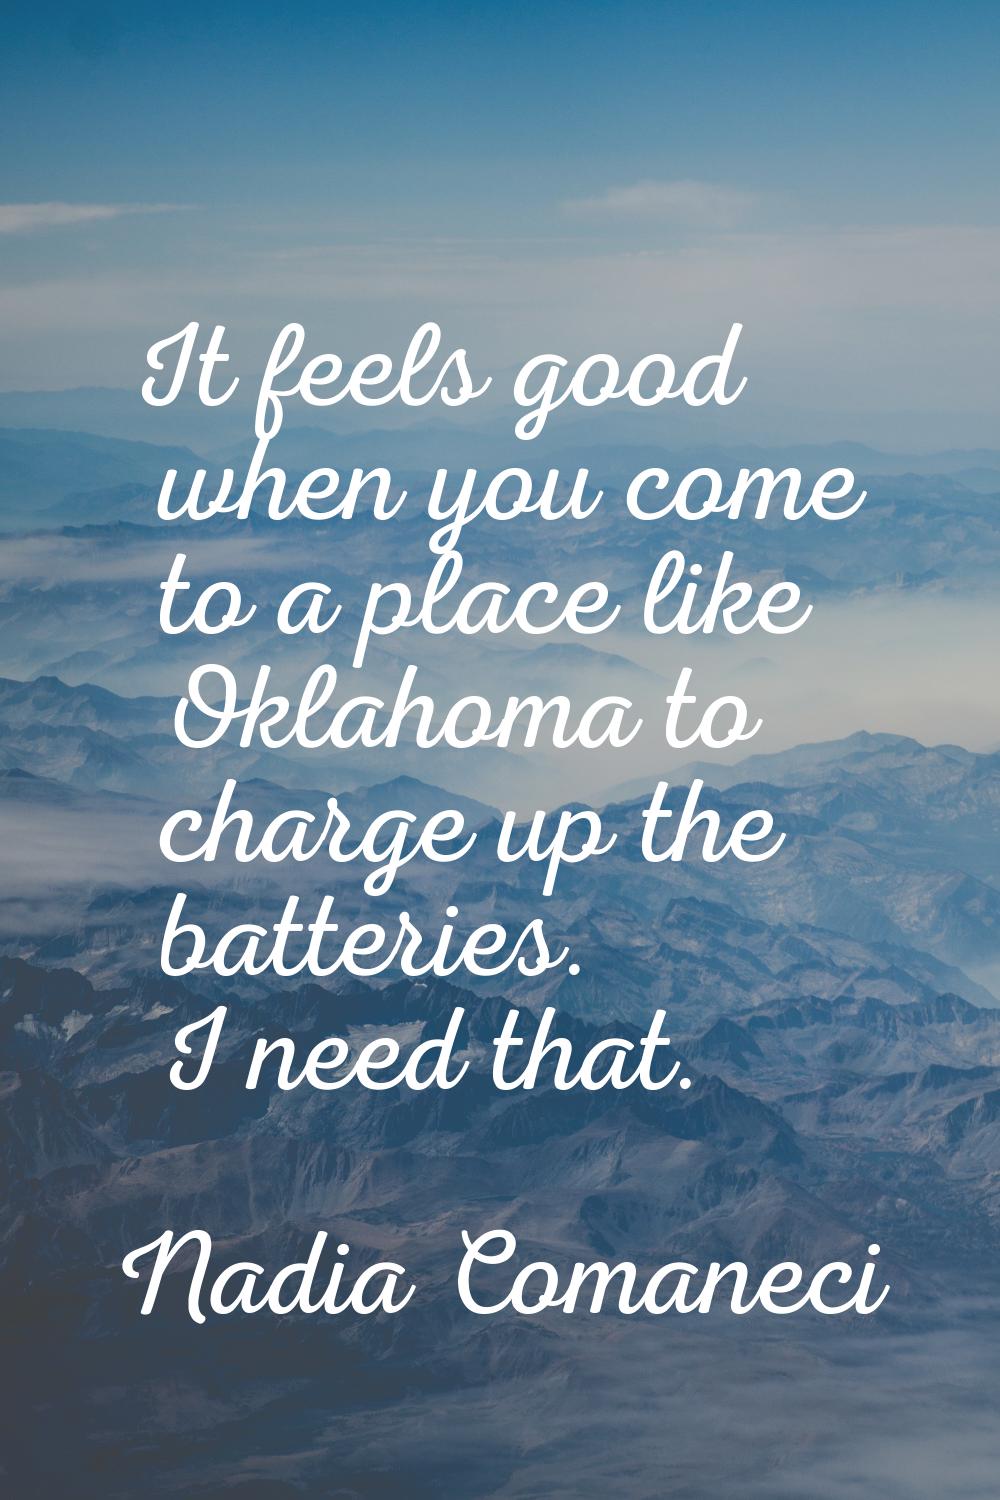 It feels good when you come to a place like Oklahoma to charge up the batteries. I need that.